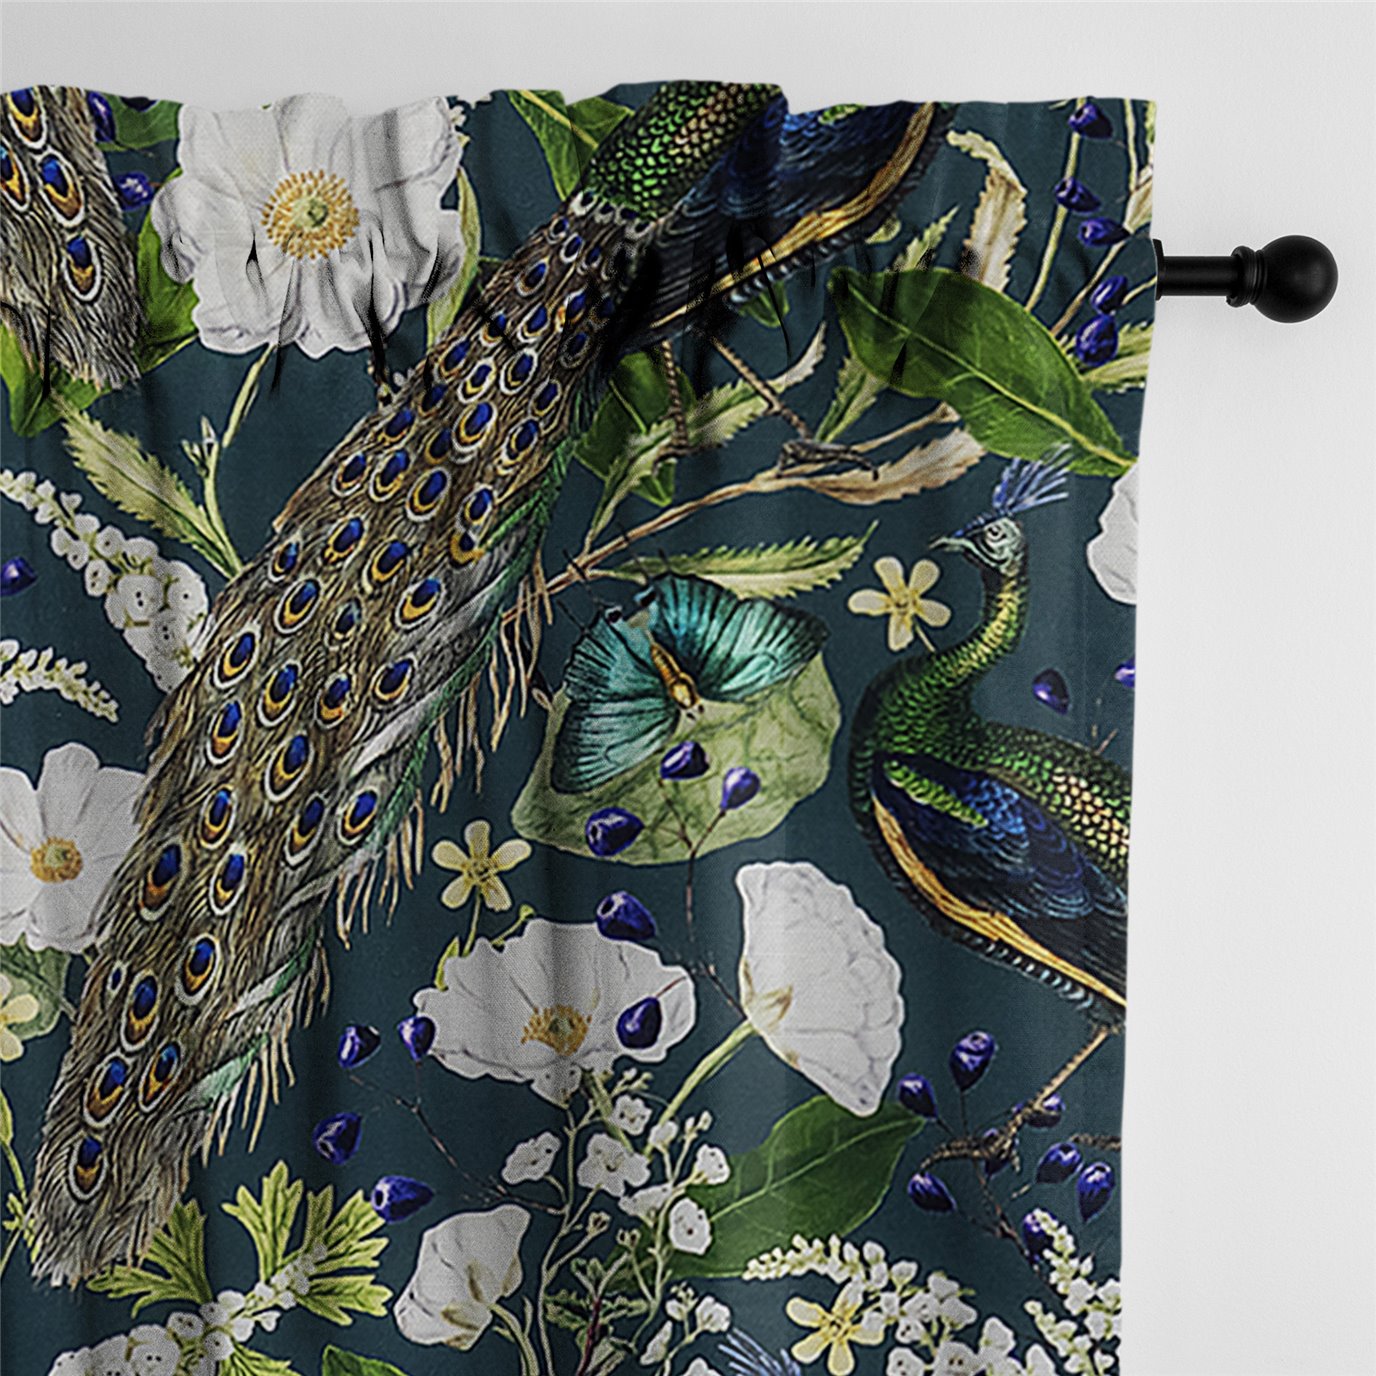 Peacock Print Teal/Navy Pole Top Drapery Panel - Pair - Size 50"x144"